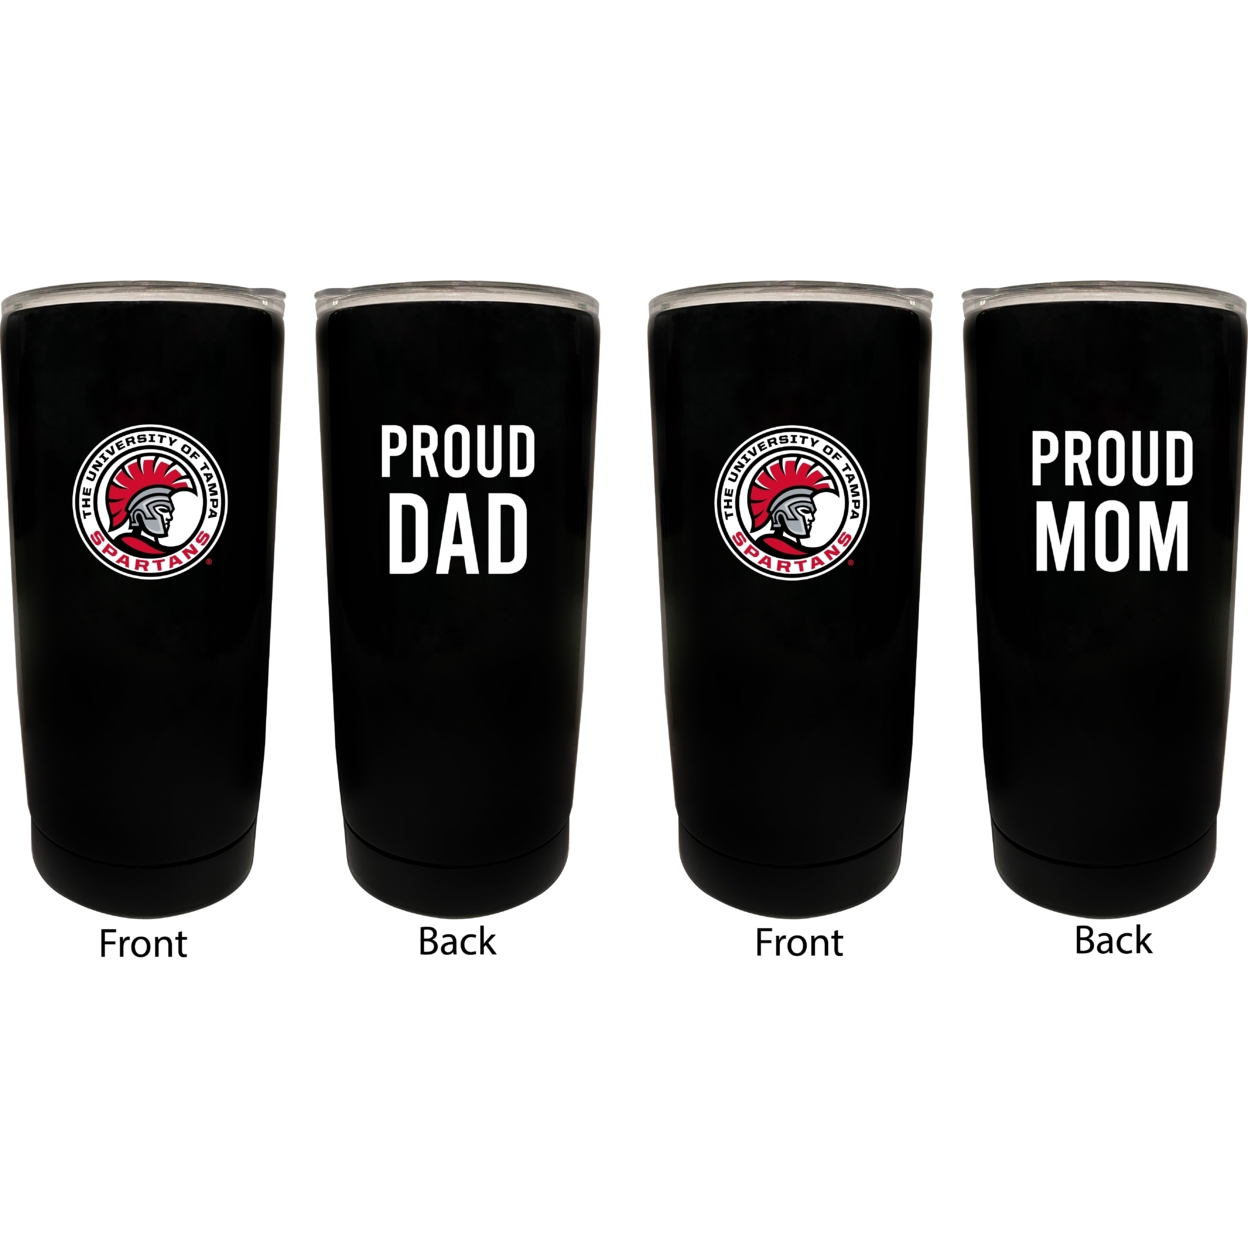 University Of Tampa Spartans Proud Mom And Dad 16 Oz Insulated Stainless Steel Tumblers 2 Pack Black.